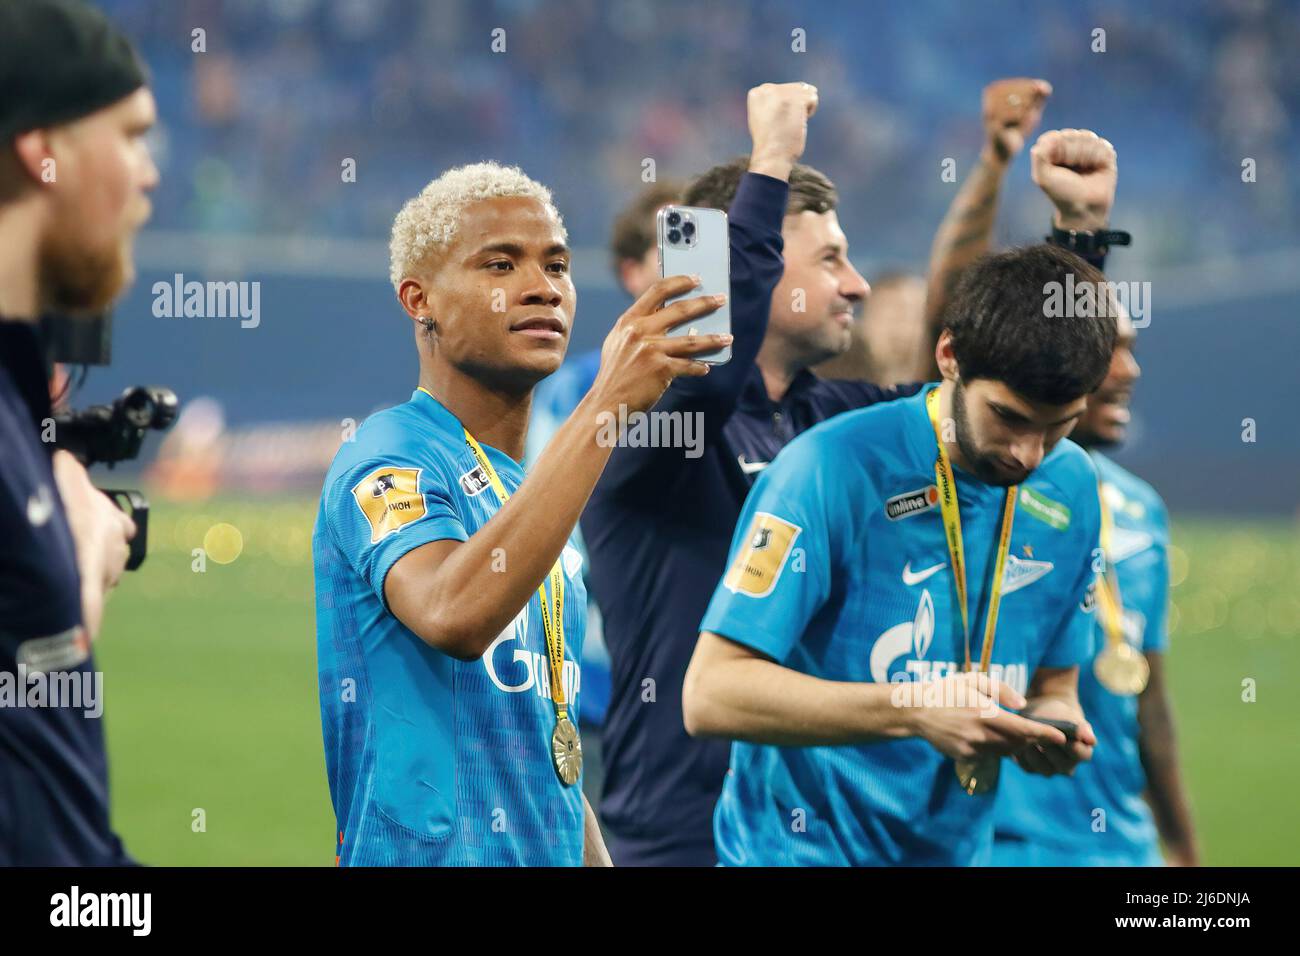 Wilmar Henrique Barrios Teran, commonly known as Wilmar Barrios (No.5) seen during the awarding ceremony of gold medals and the Cup of Champions of Russia to football players of the Zenit football club. (Photo by Maksim Konstantinov / SOPA Image/Sipa USA) Stock Photo